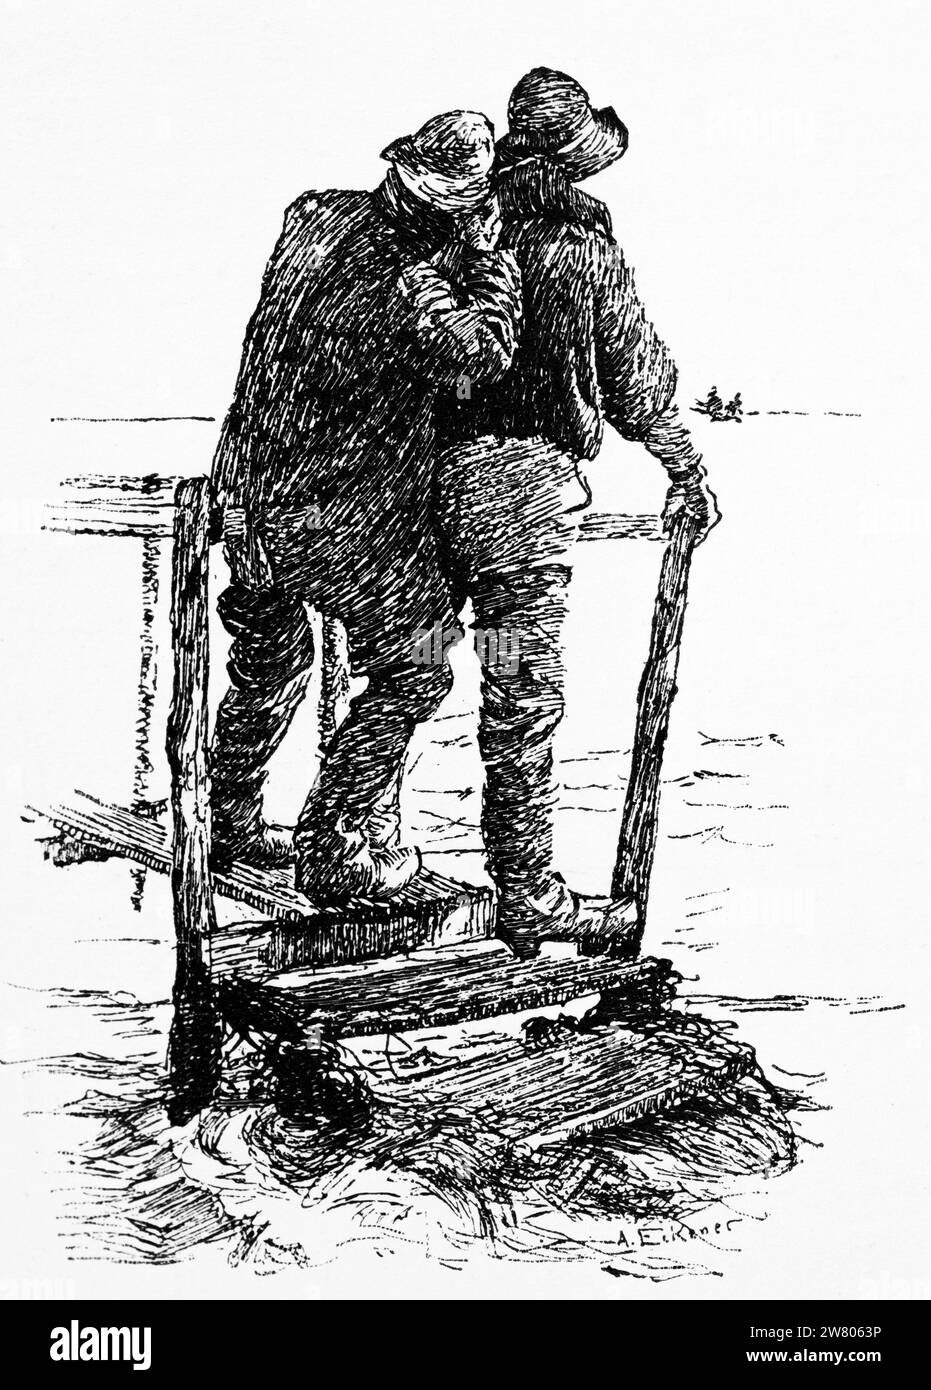 Two seamen standing on a pier watching the sea, Schleswig-Holstein, Northern Germany, histrorical Illustration 1896 Stock Photo